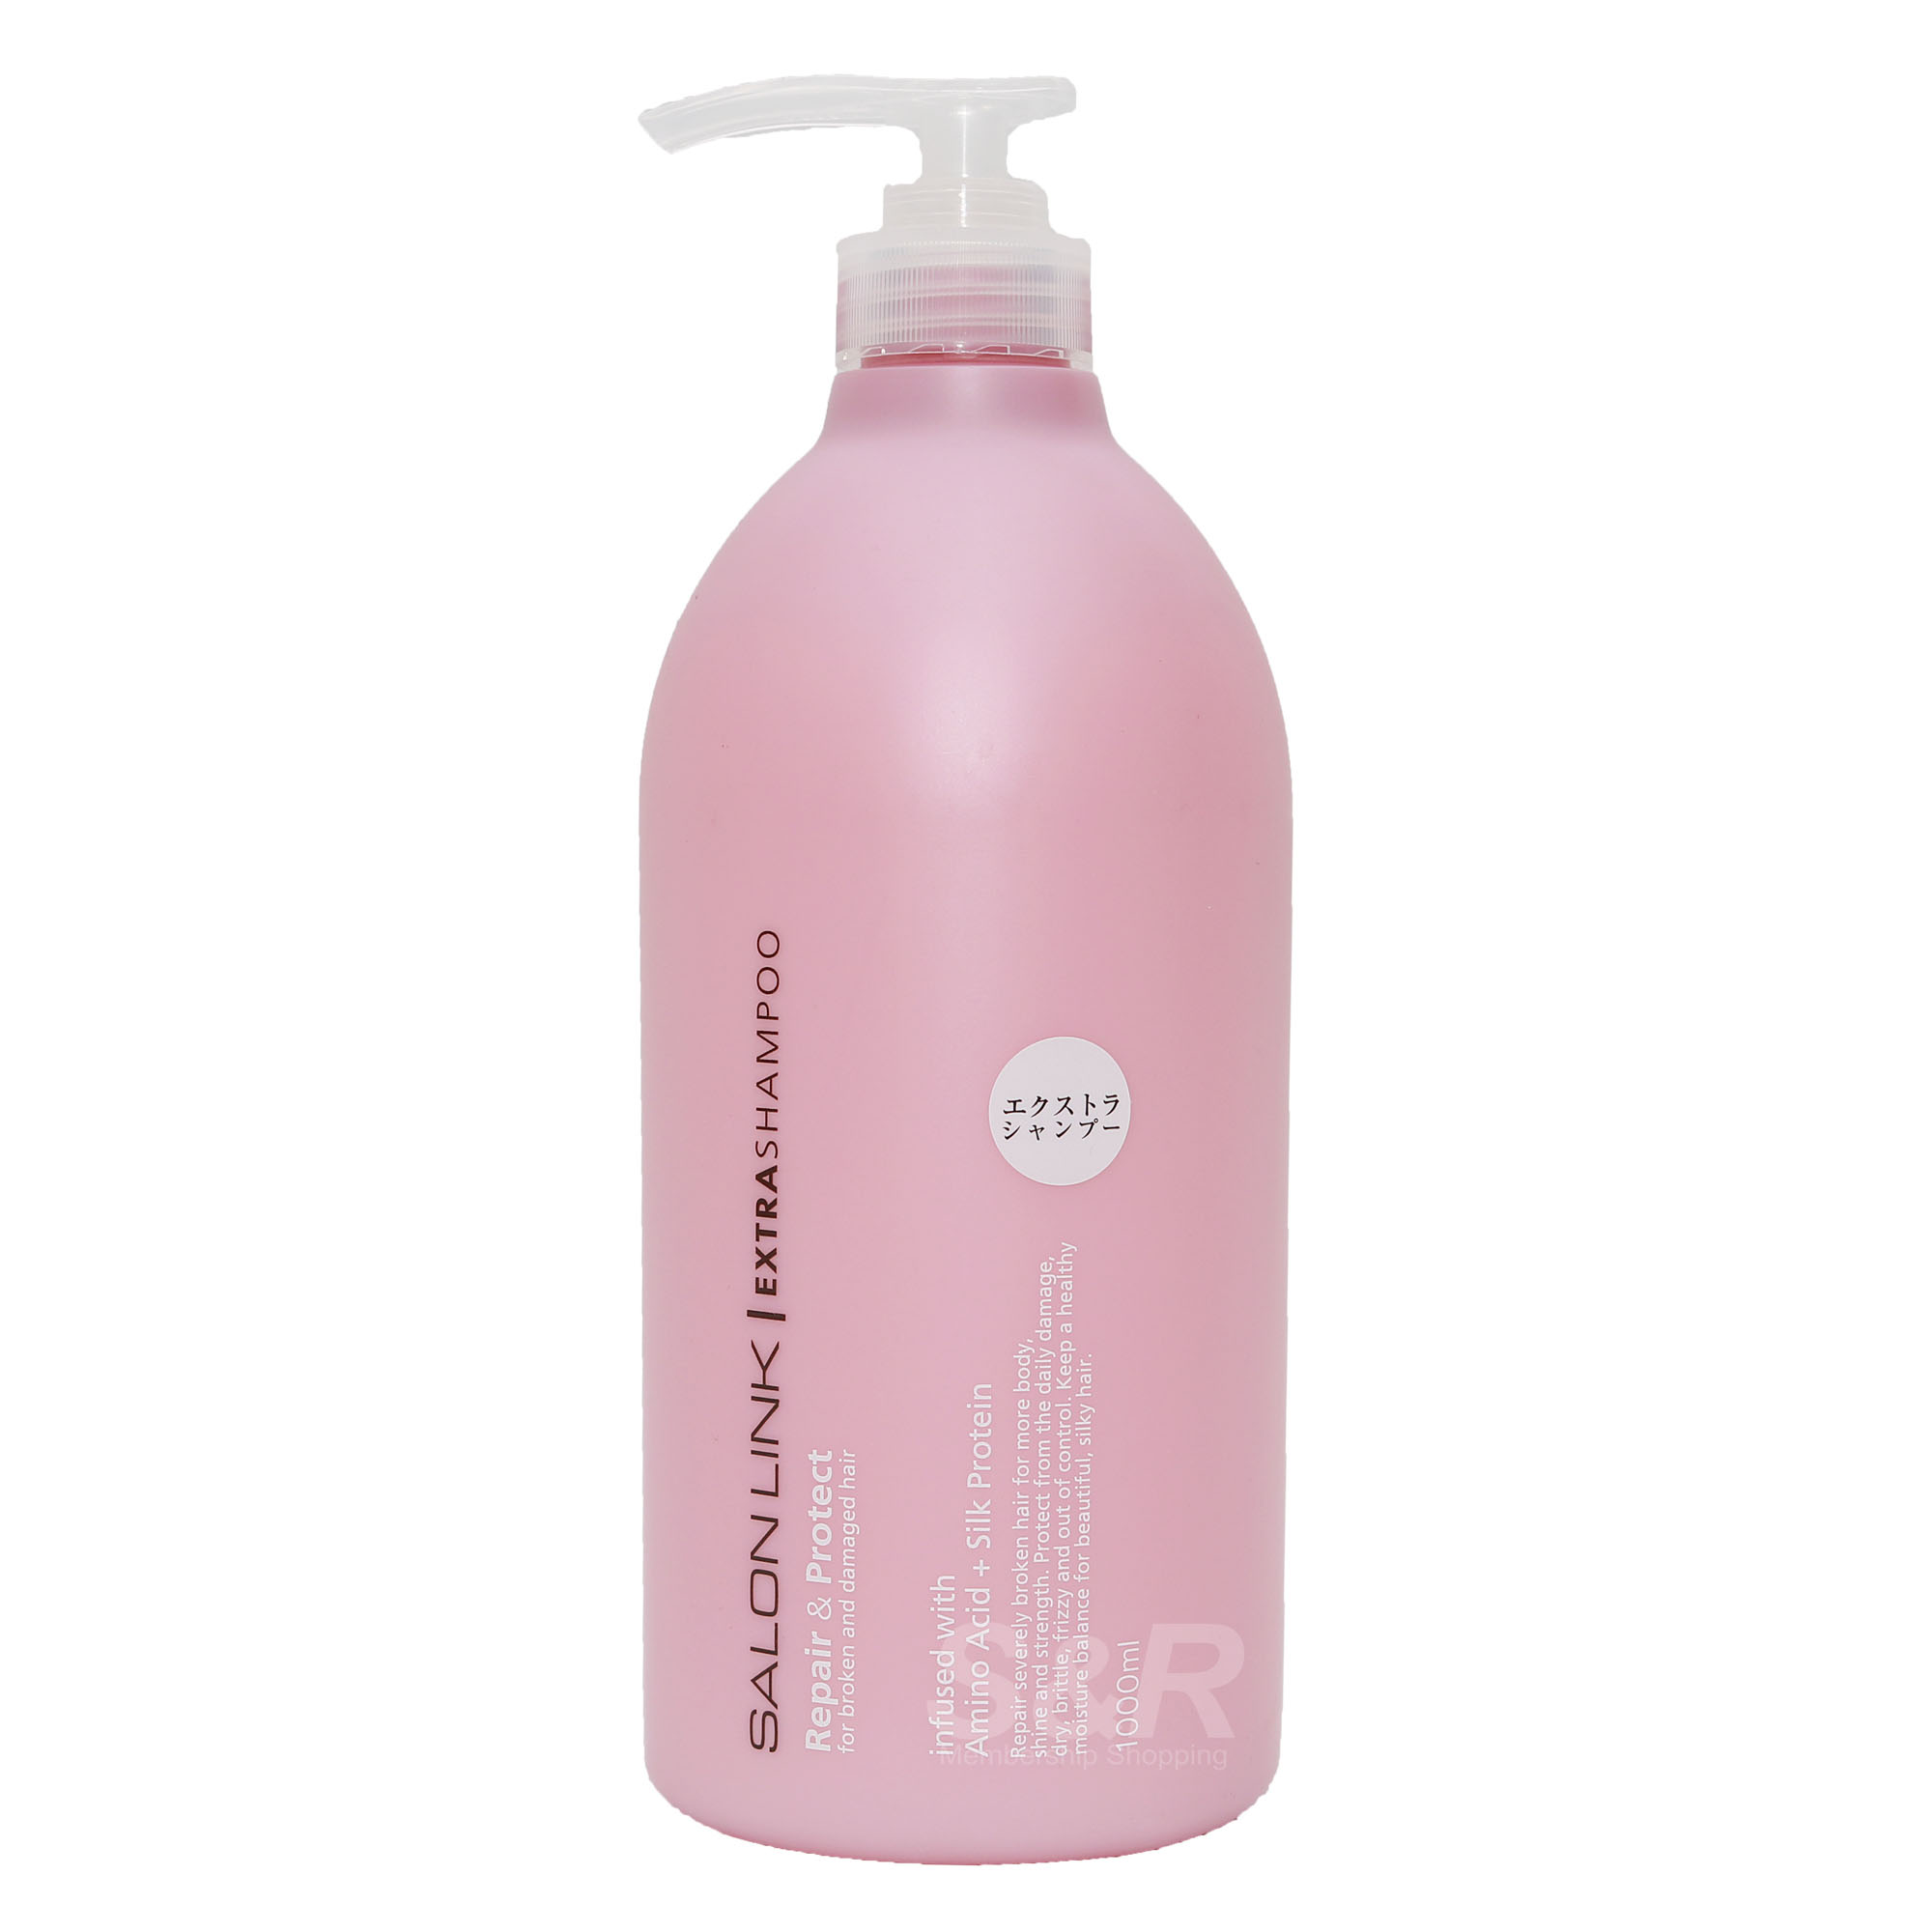 Salon Link Repair and Protect Extra Shampoo 1L